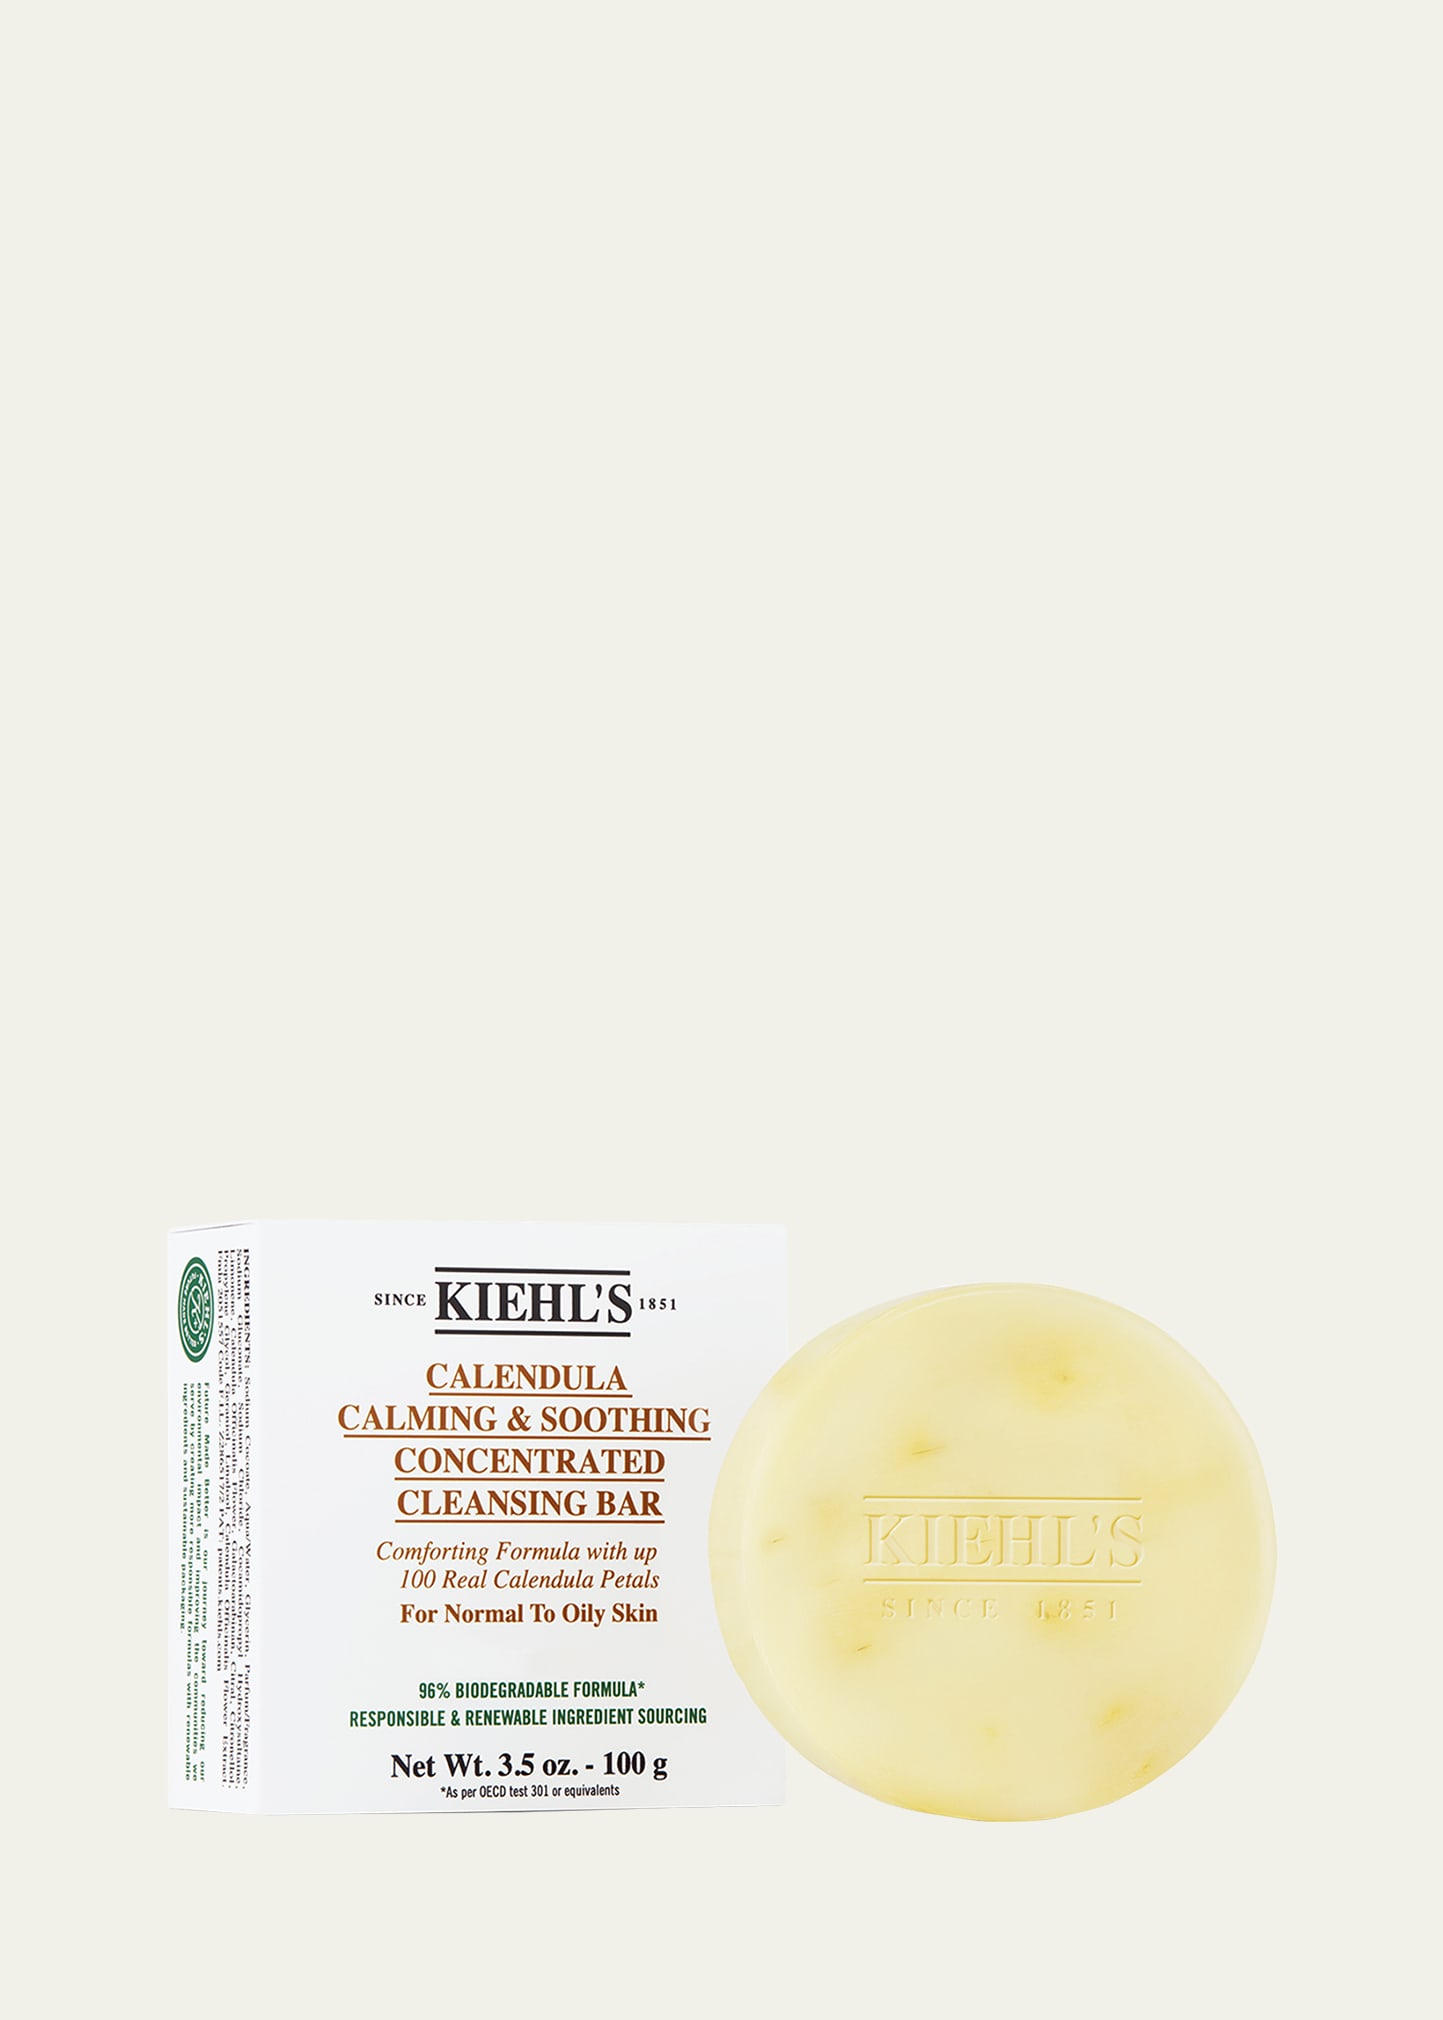 3.5 oz. Calendula Concentrated Cleansing Bar